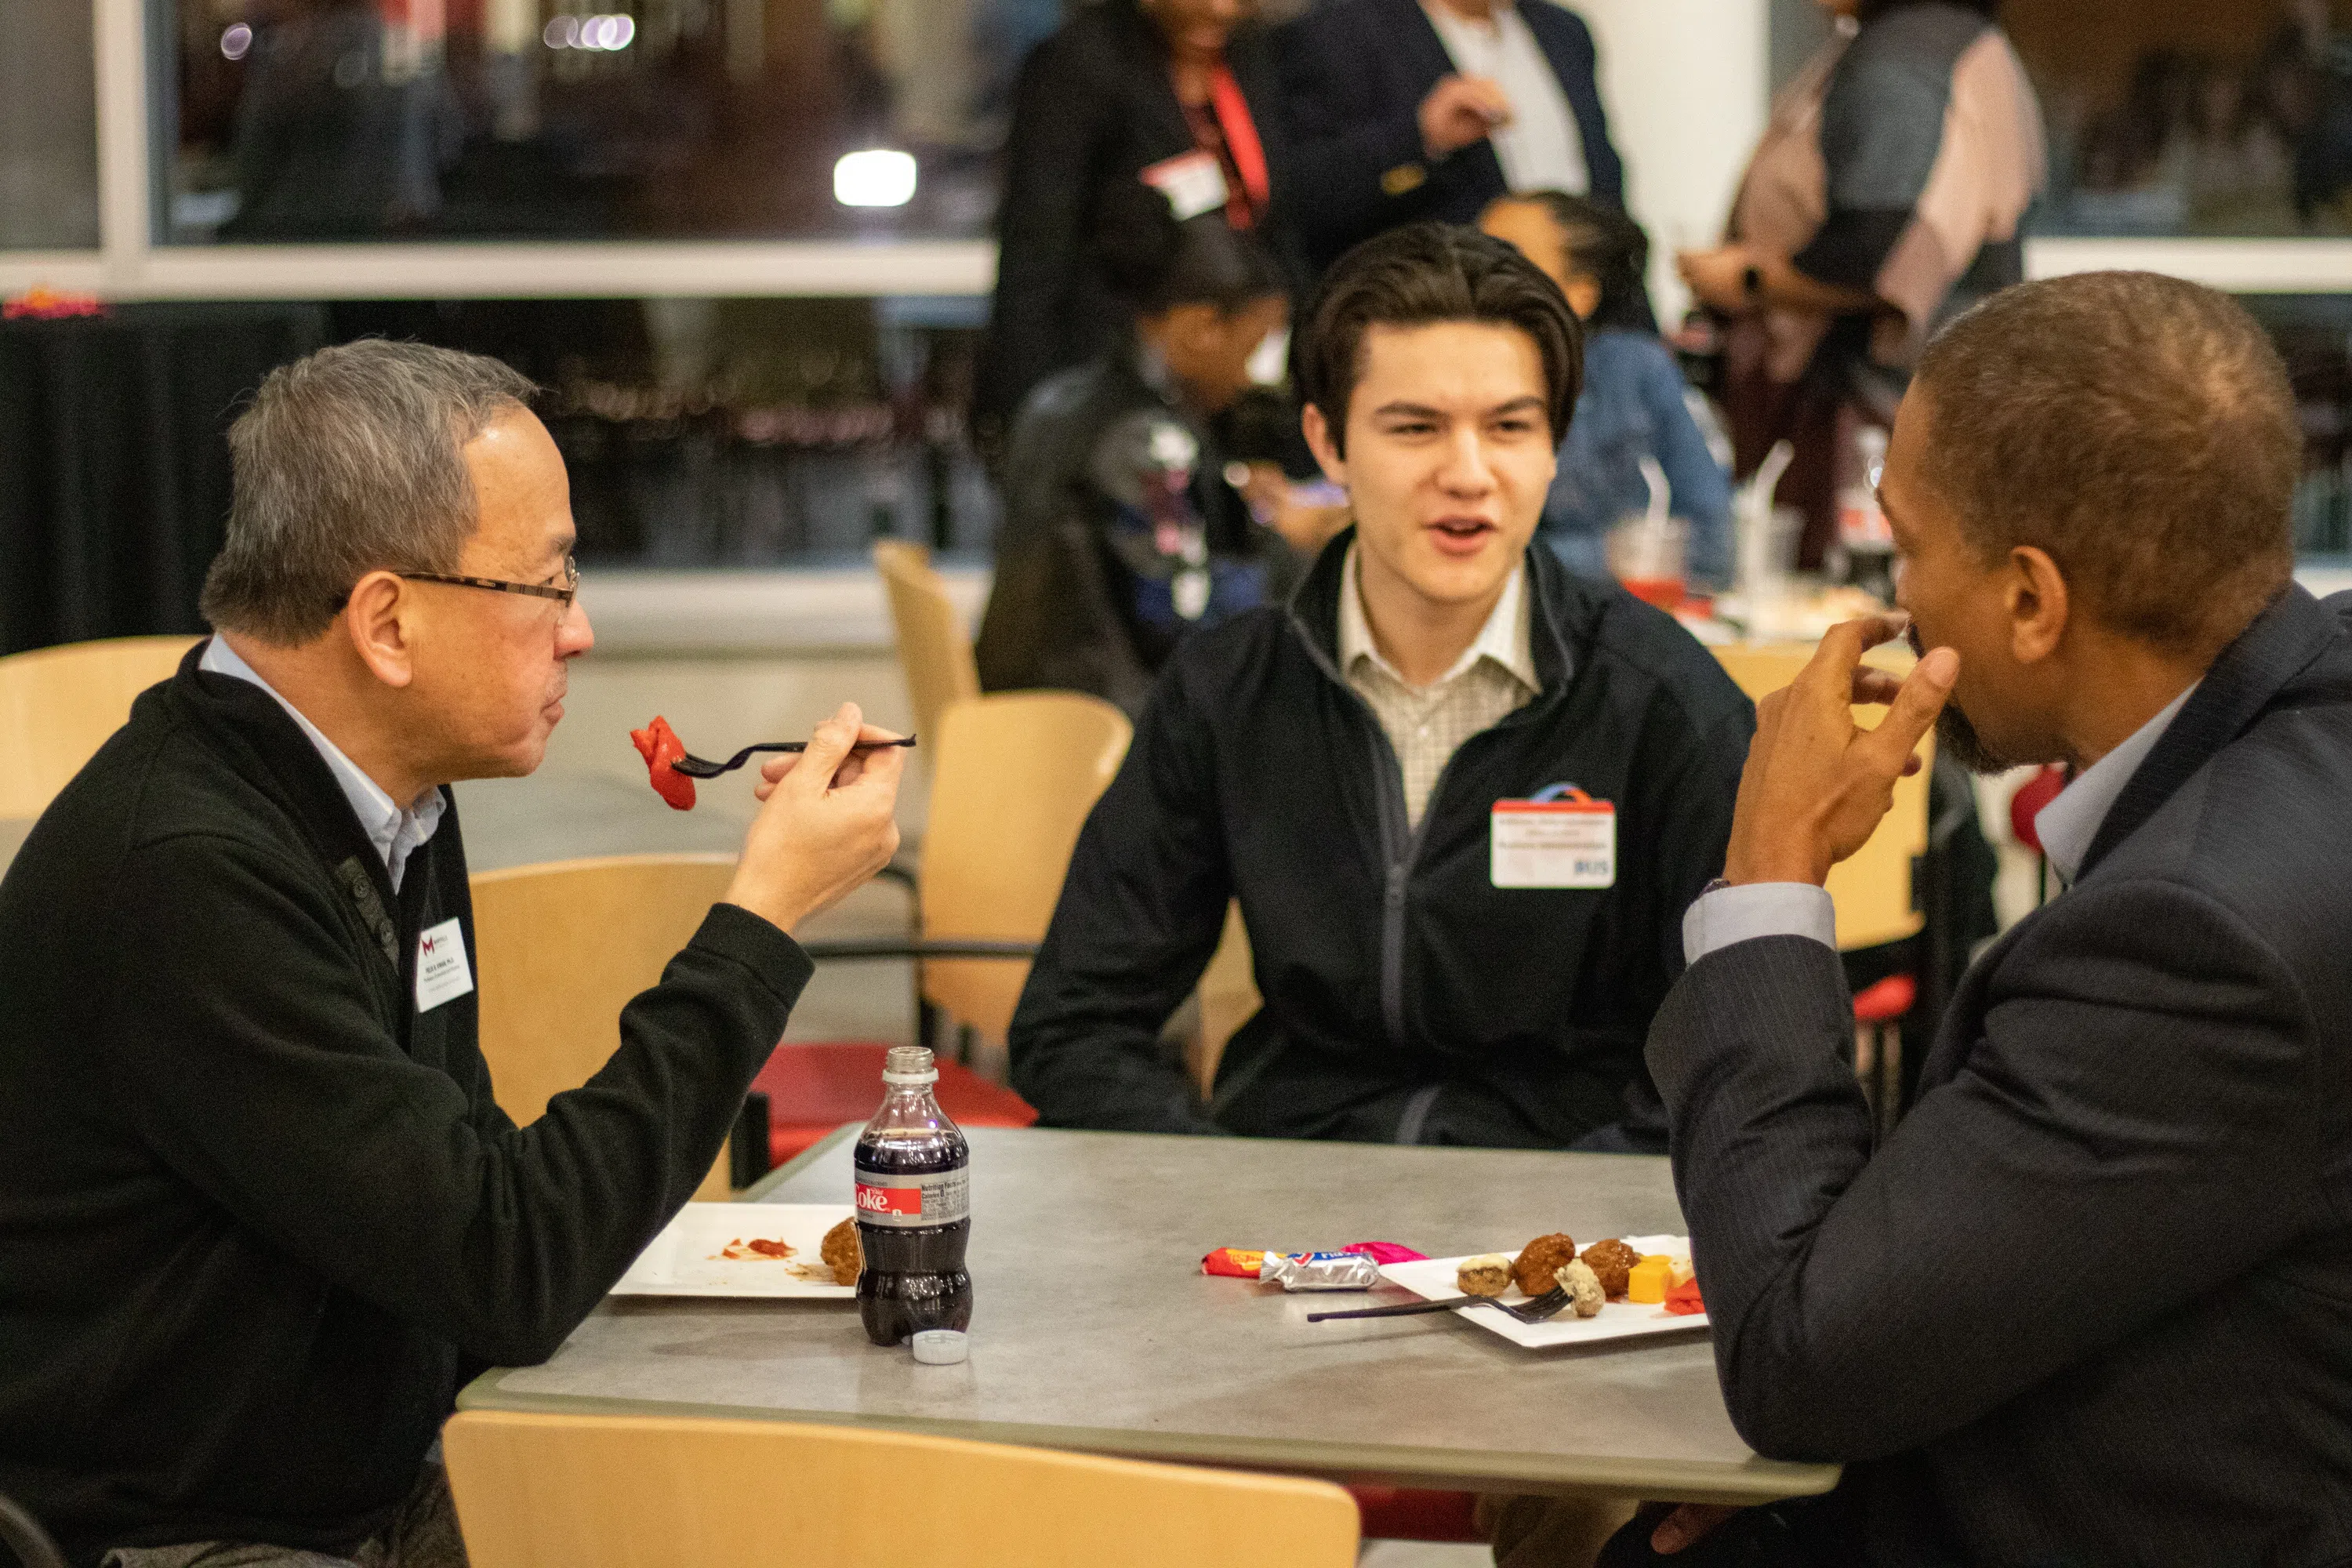 Faculty and students share a meal in the dining hall.